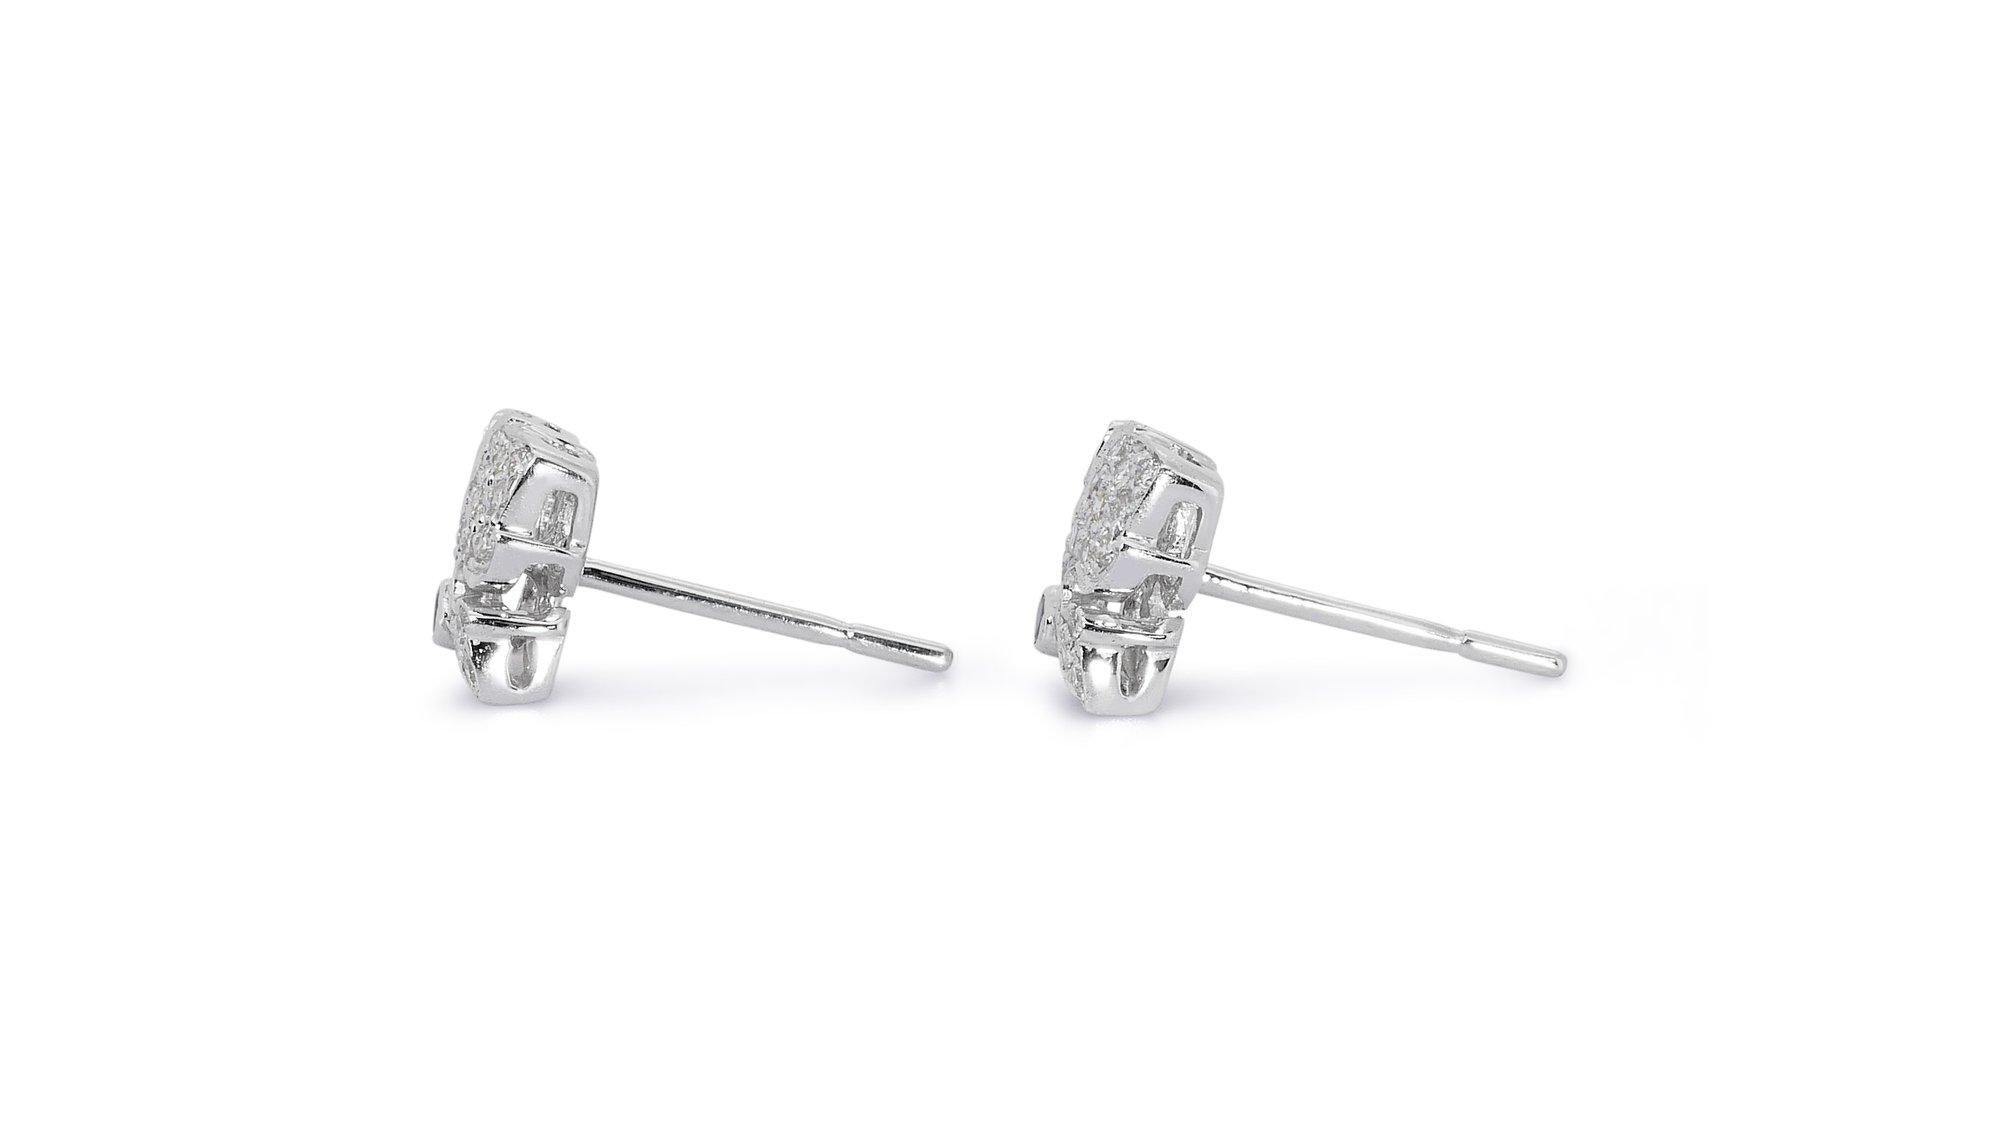 Dazzling 18k White Gold Stud Earrings W/ 0.88 Ct Natural Diamonds Aig Cert For Sale 1